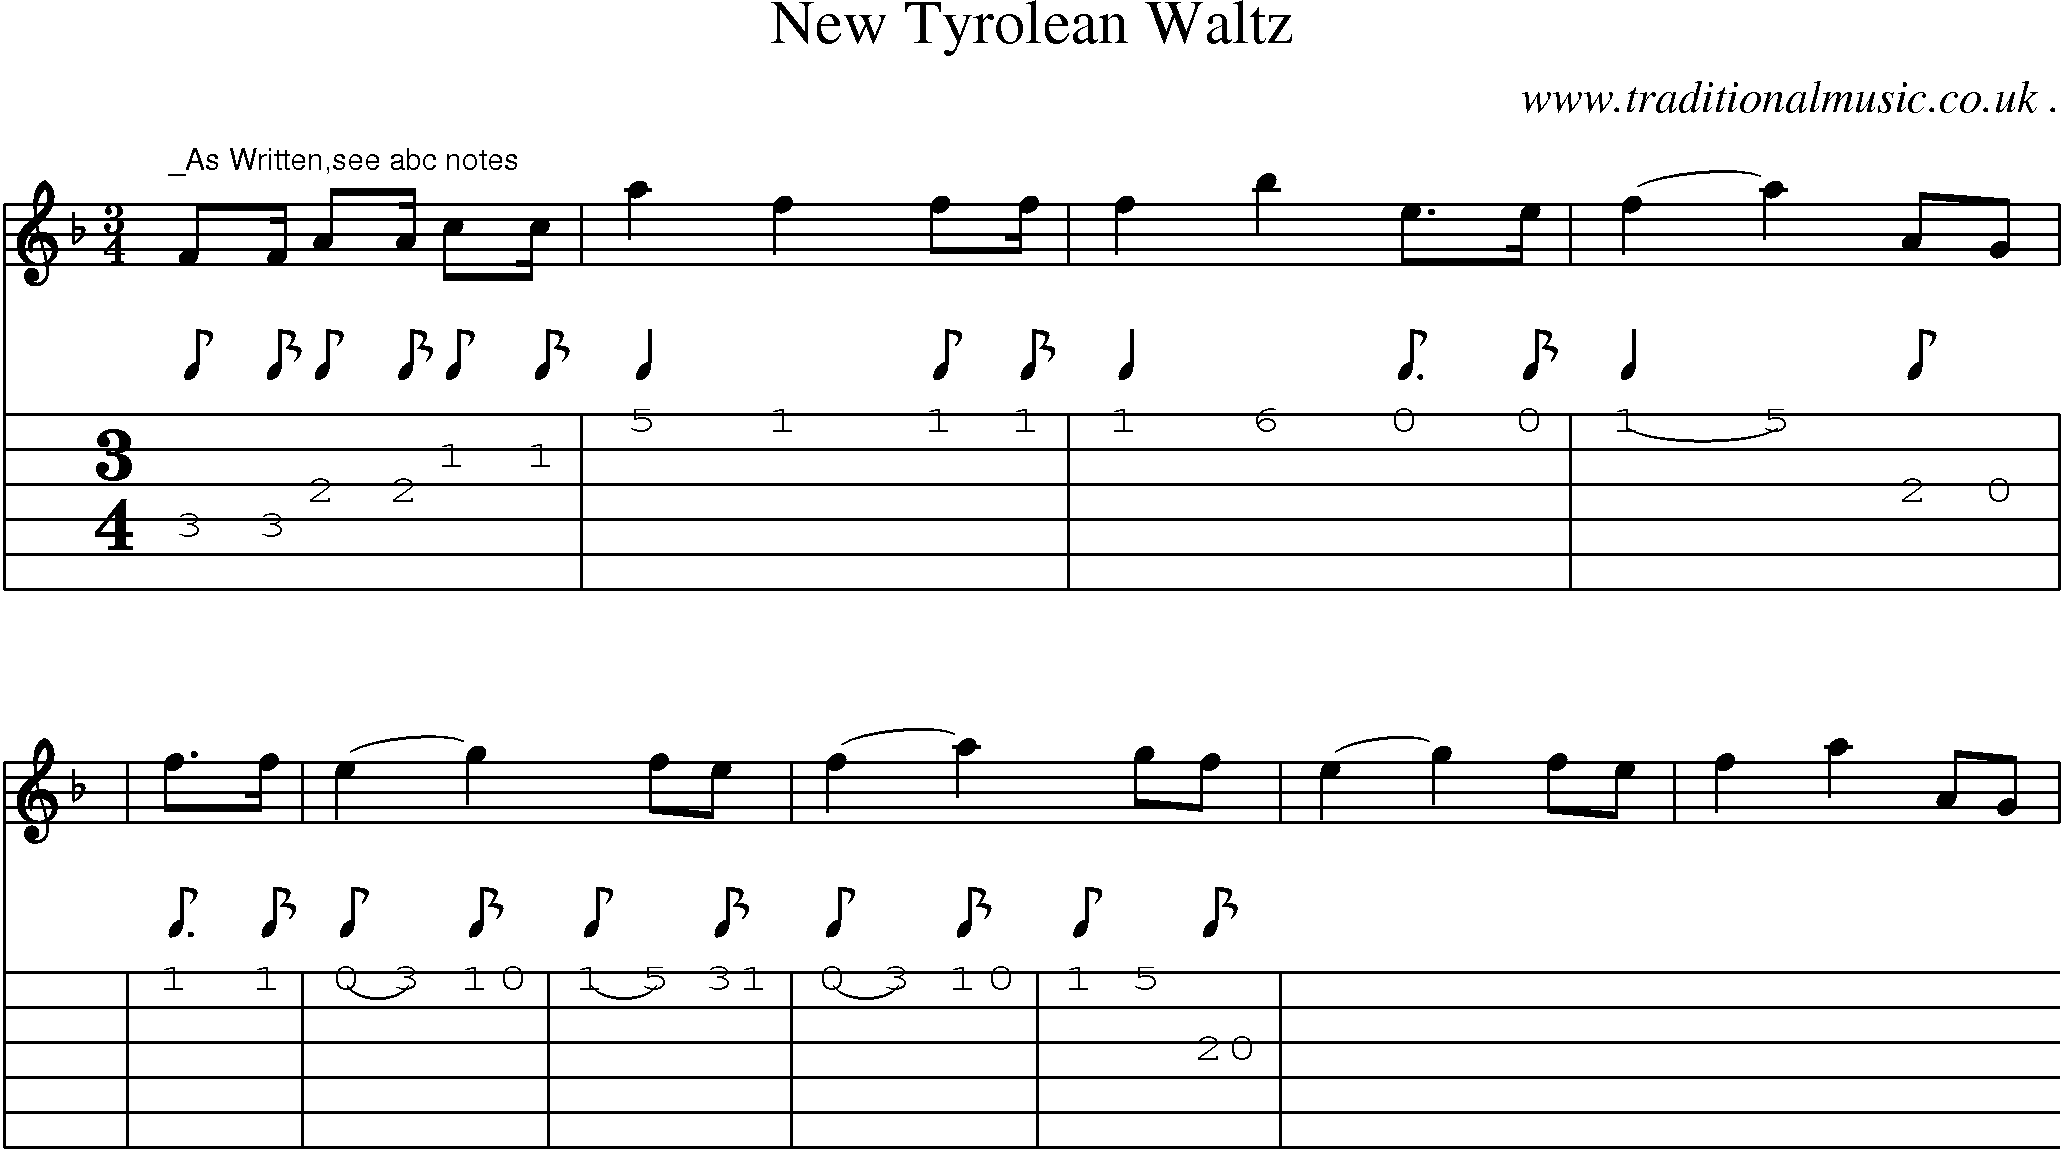 Sheet-Music and Guitar Tabs for New Tyrolean Waltz